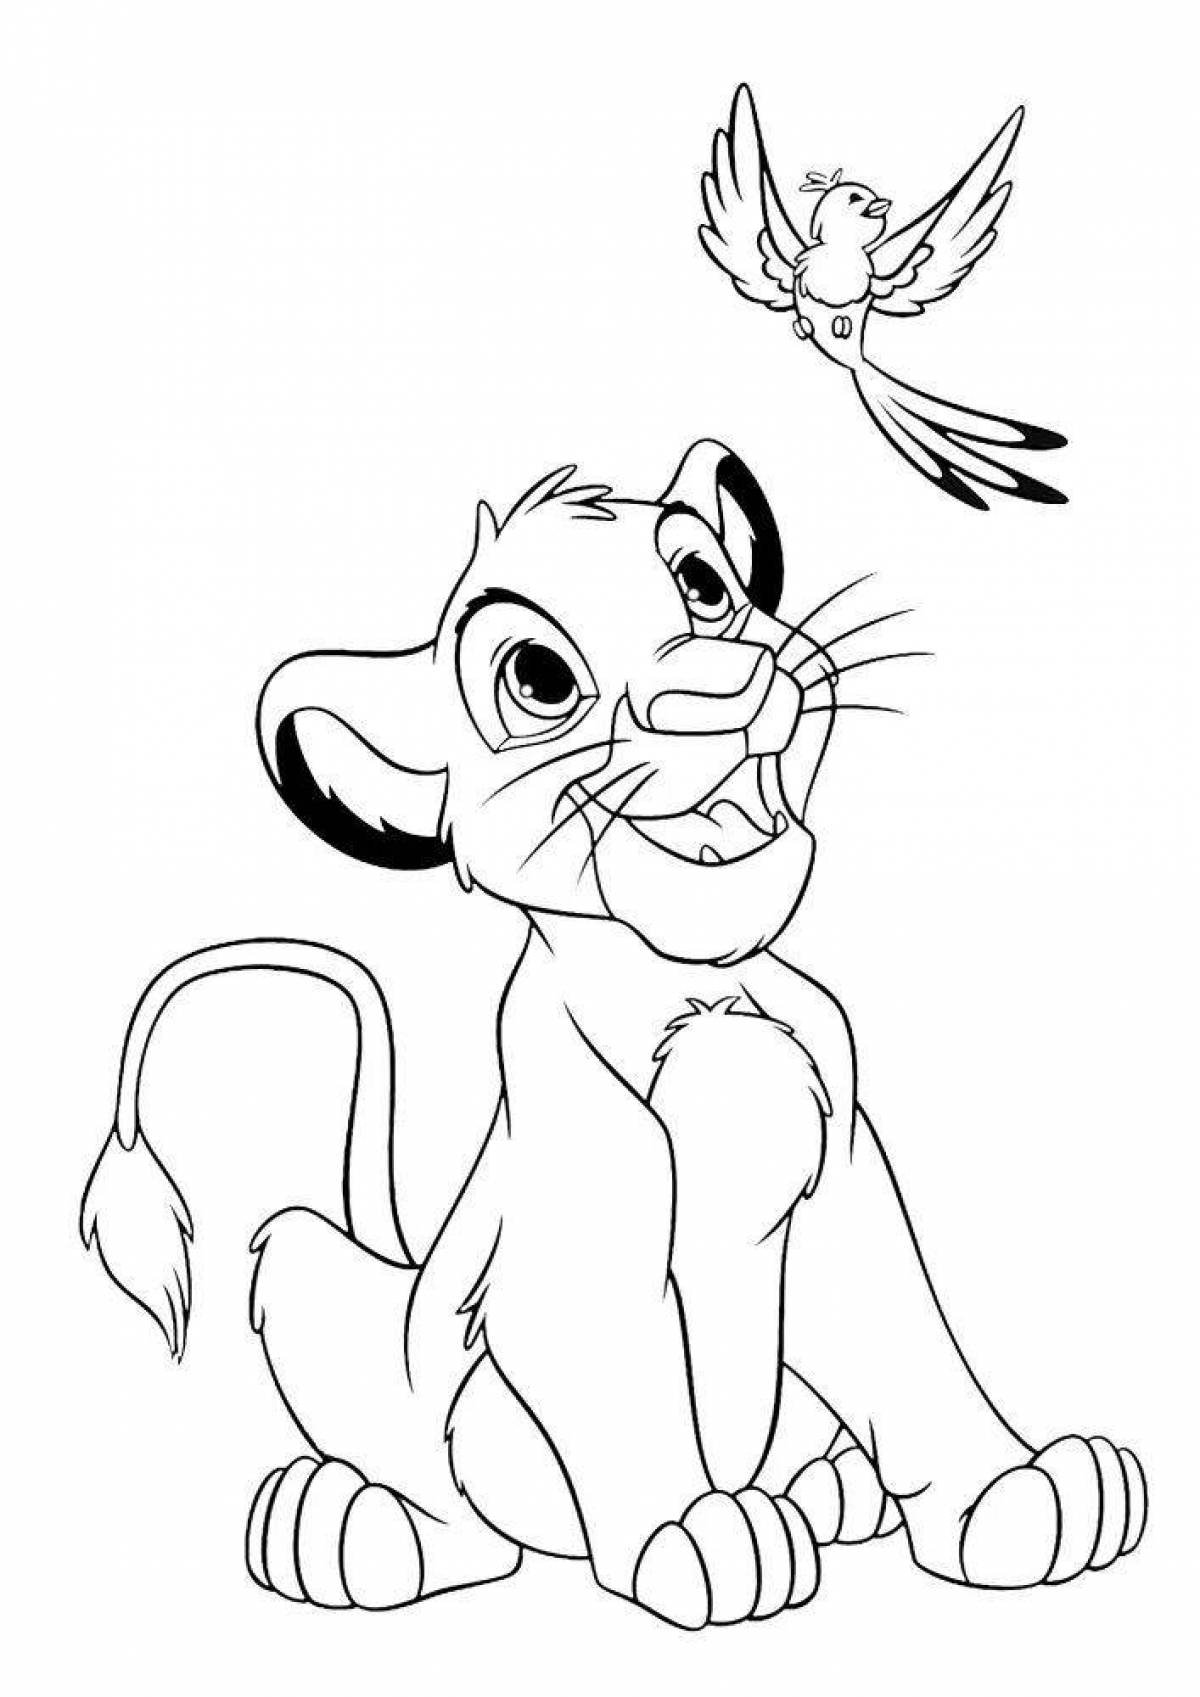 Colorfully crafted simba coloring page